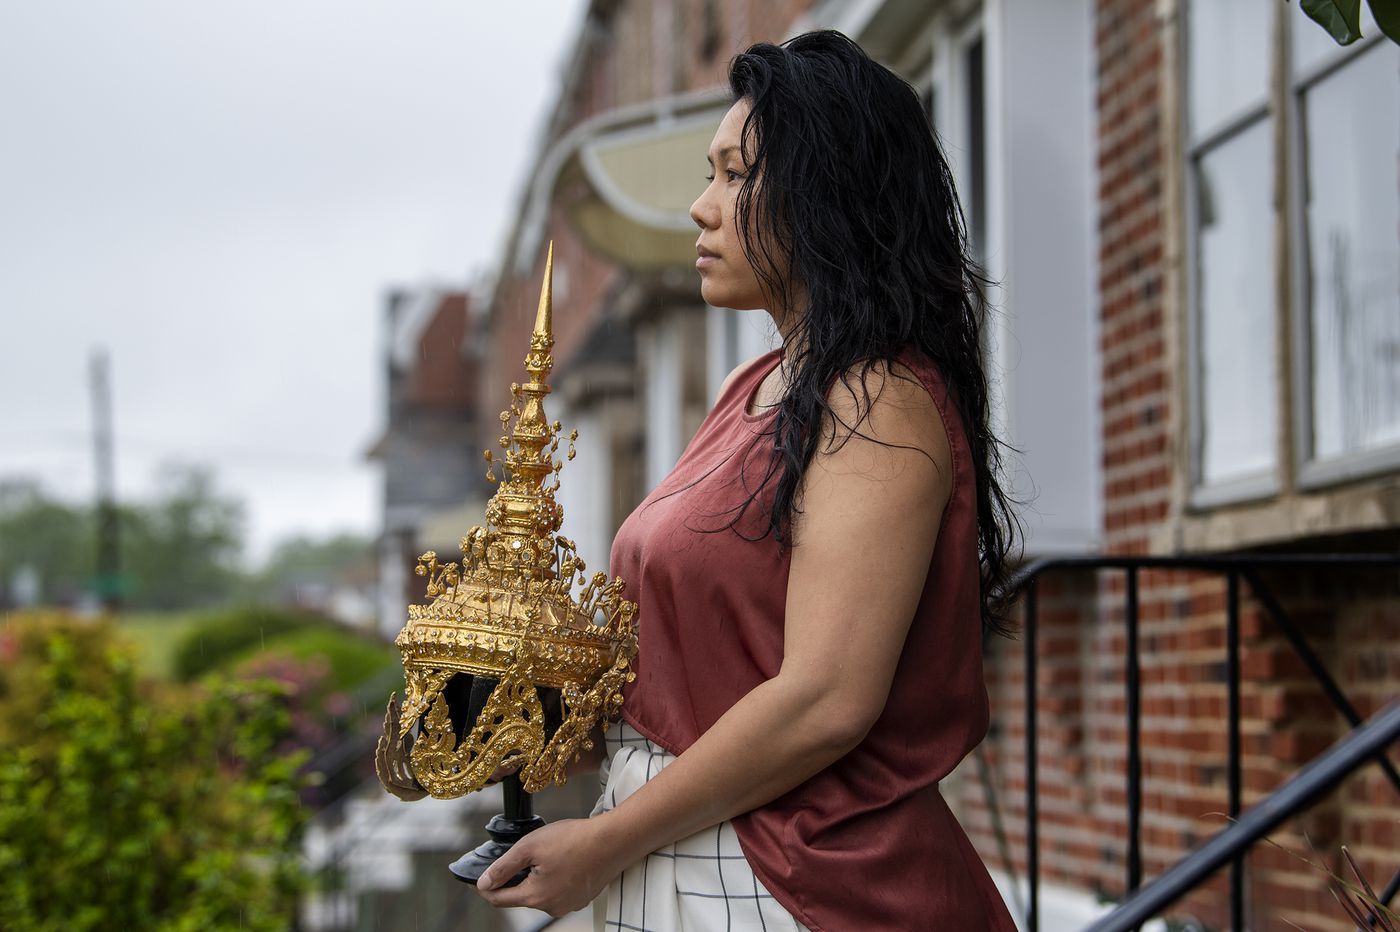 Catzie Vilayphonh is photographed holding a Laos folk crown near her home in Philadelphia, Pa. Friday, May 22, 2020. Vilayphonh is a poet who runs the community arts group Laos in the House. Image by Jose F. Moreno / The Philadelphia Inquirer. United States, 2020.